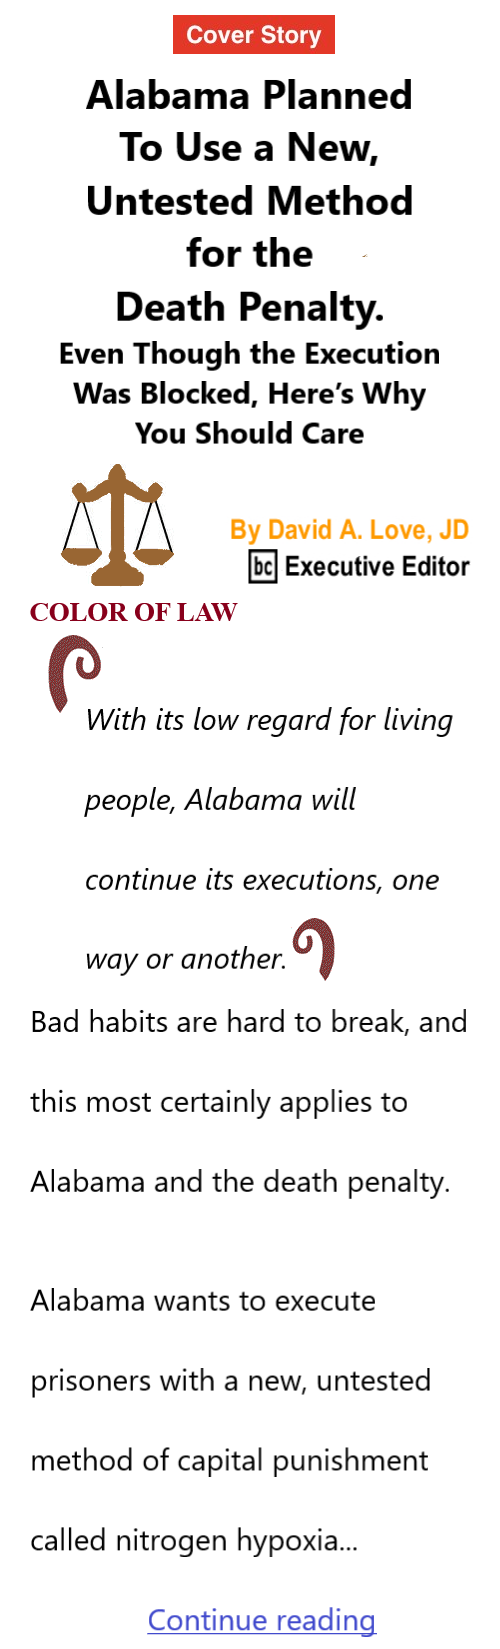 BlackCommentator.com Sept 29, 2022 - Issue 925: Cover Story - Alabama Planned To Use a New, Untested Method for the Death Penalty Even Though the Execution Was Blocked, Here’s Why You Should Care - Color of Law By David A. Love, JD, BC Executive Editor